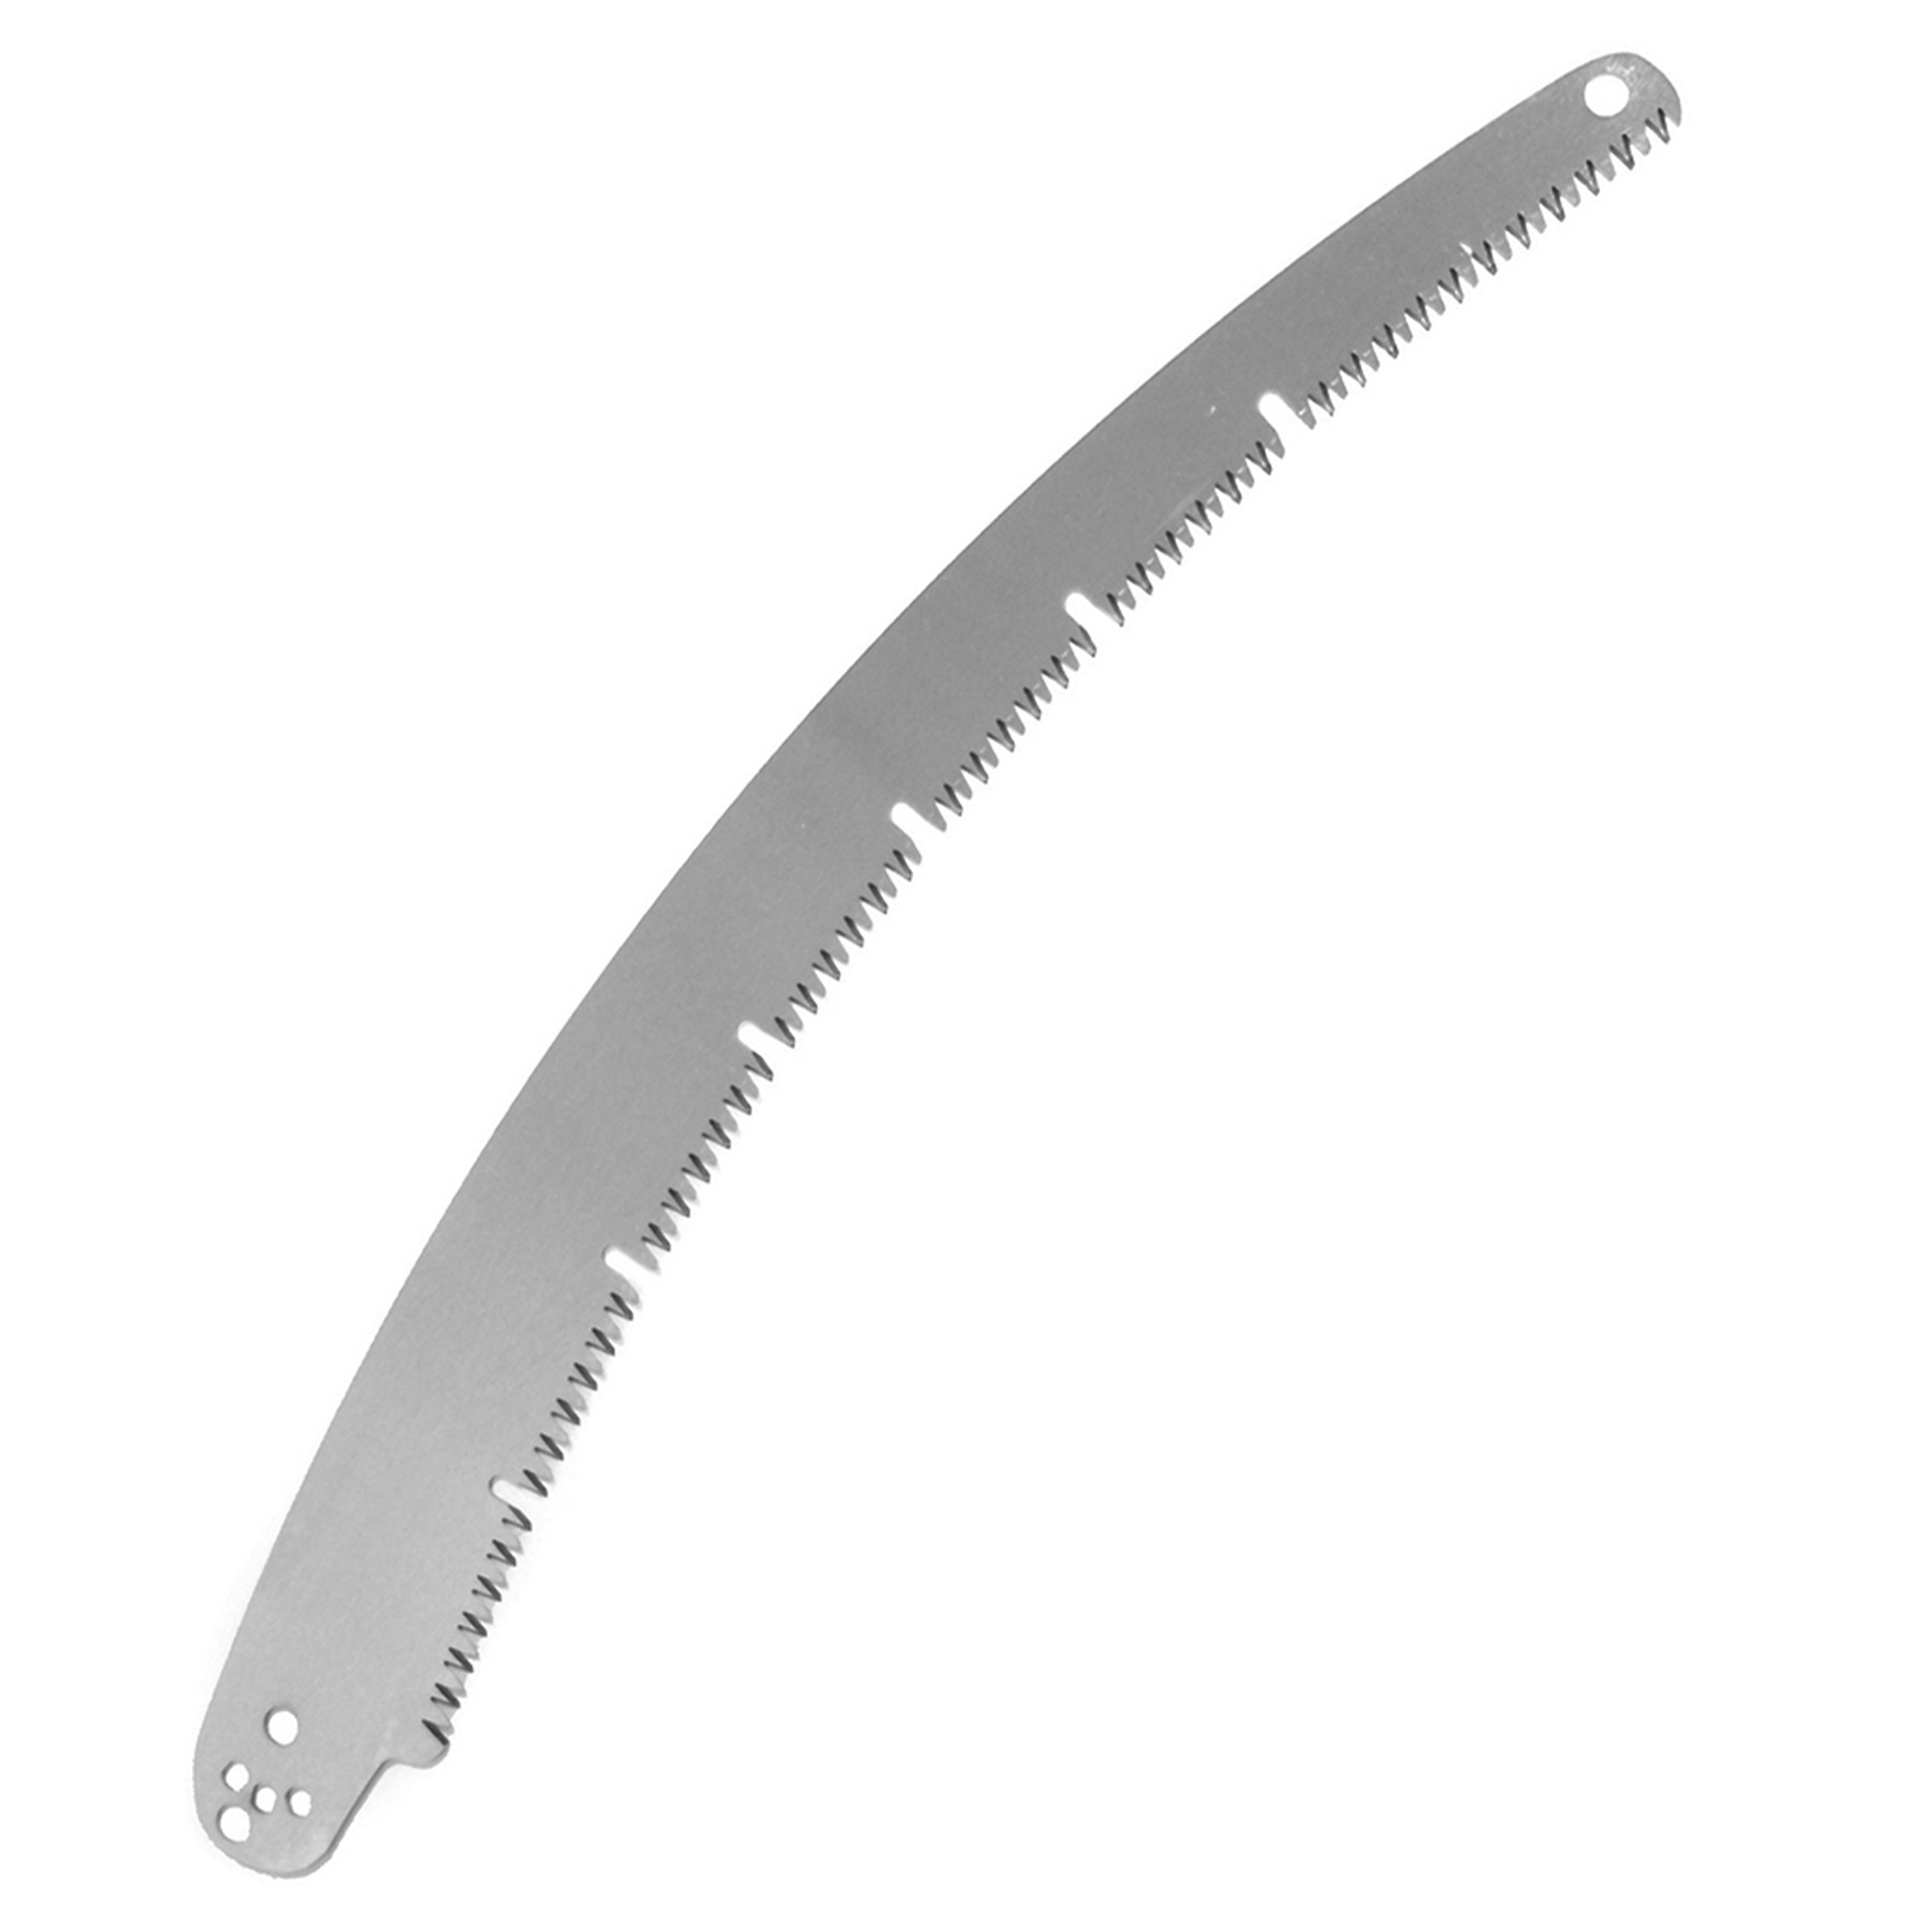 Jameson 13 In Barracuda Tri-cut Replacement Pruning Saw Blade Chrome Plated 3pk for sale online 